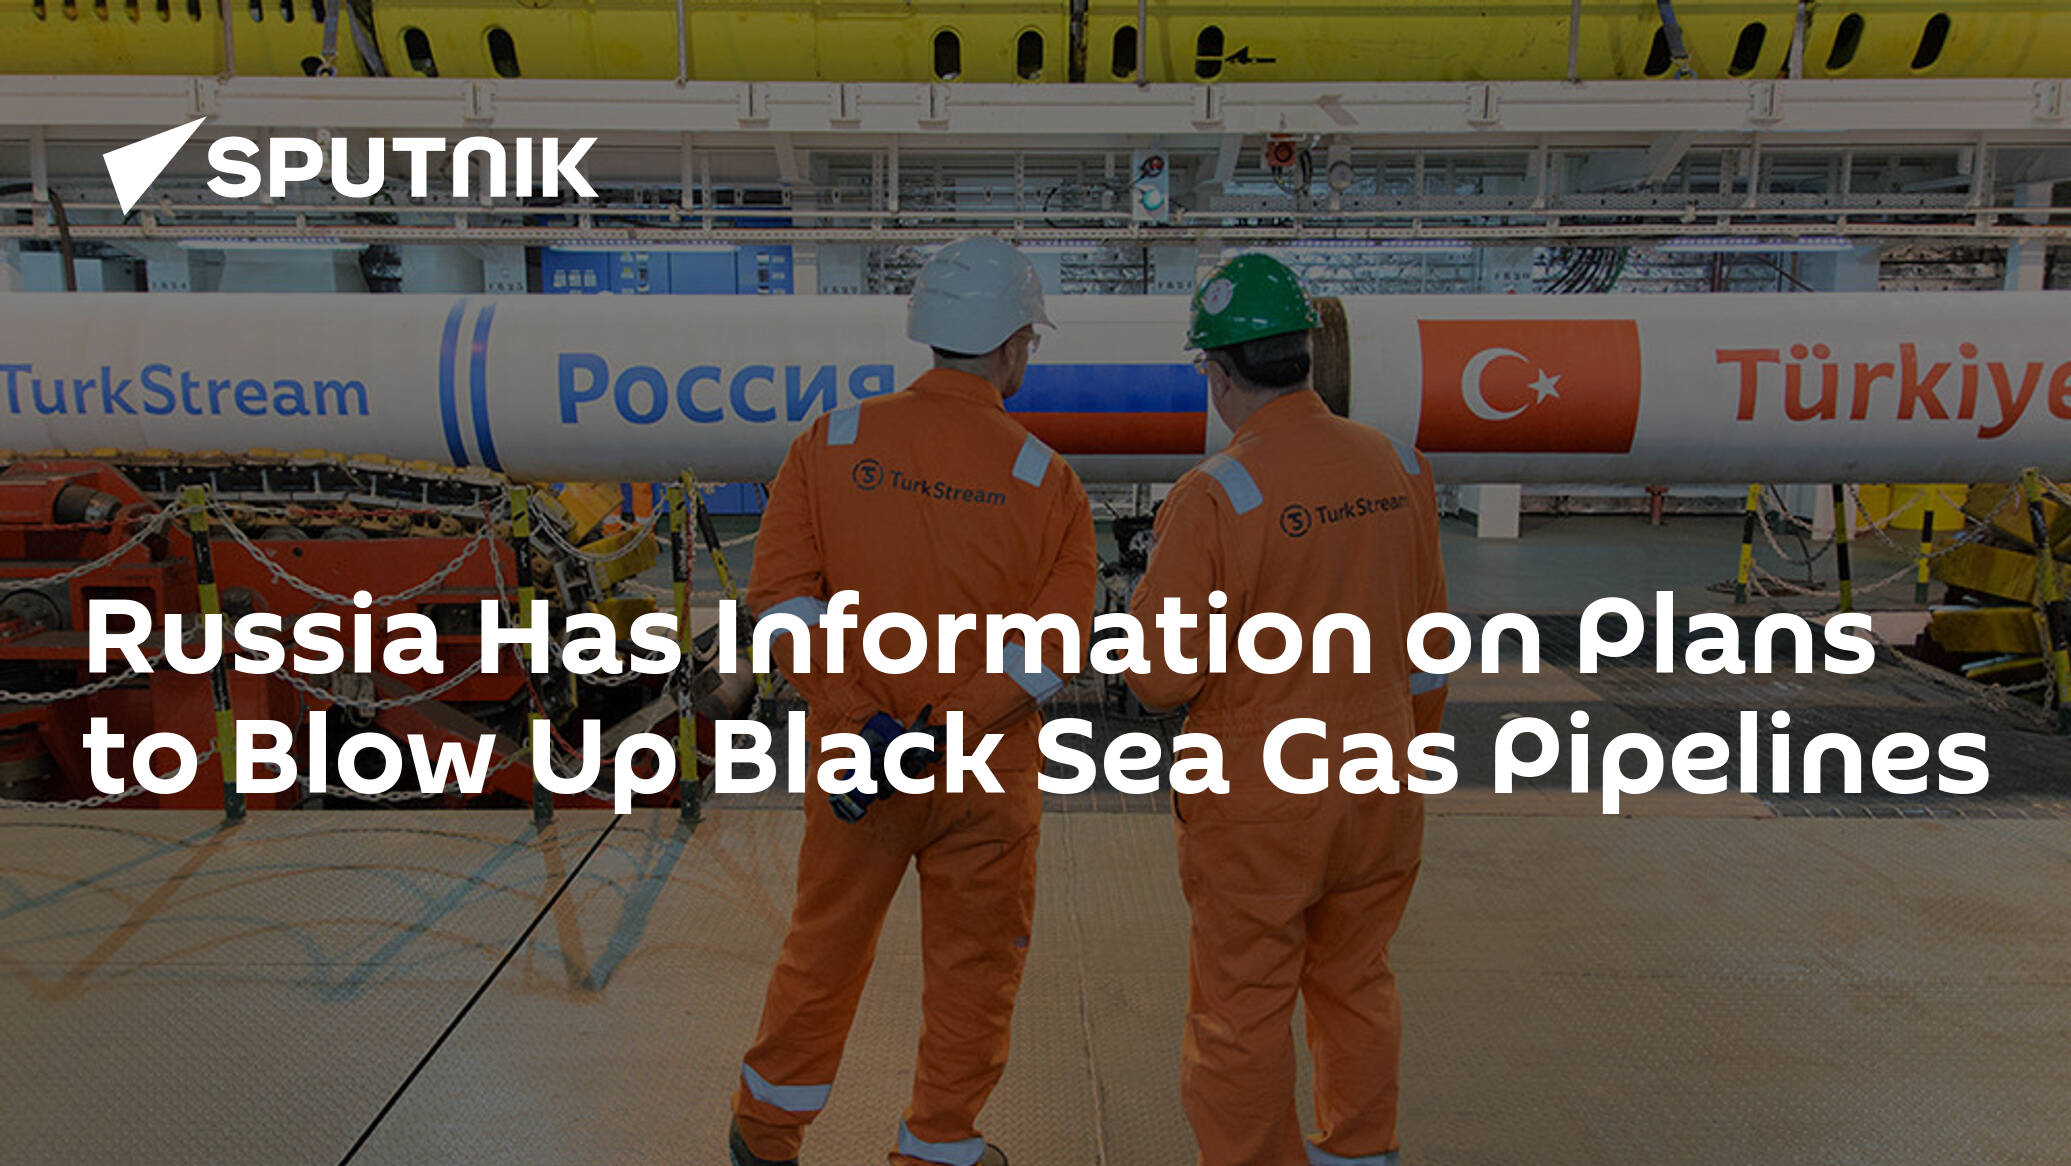 Russia Has Information on Plans to Blow Up Black Sea Gas Pipelines